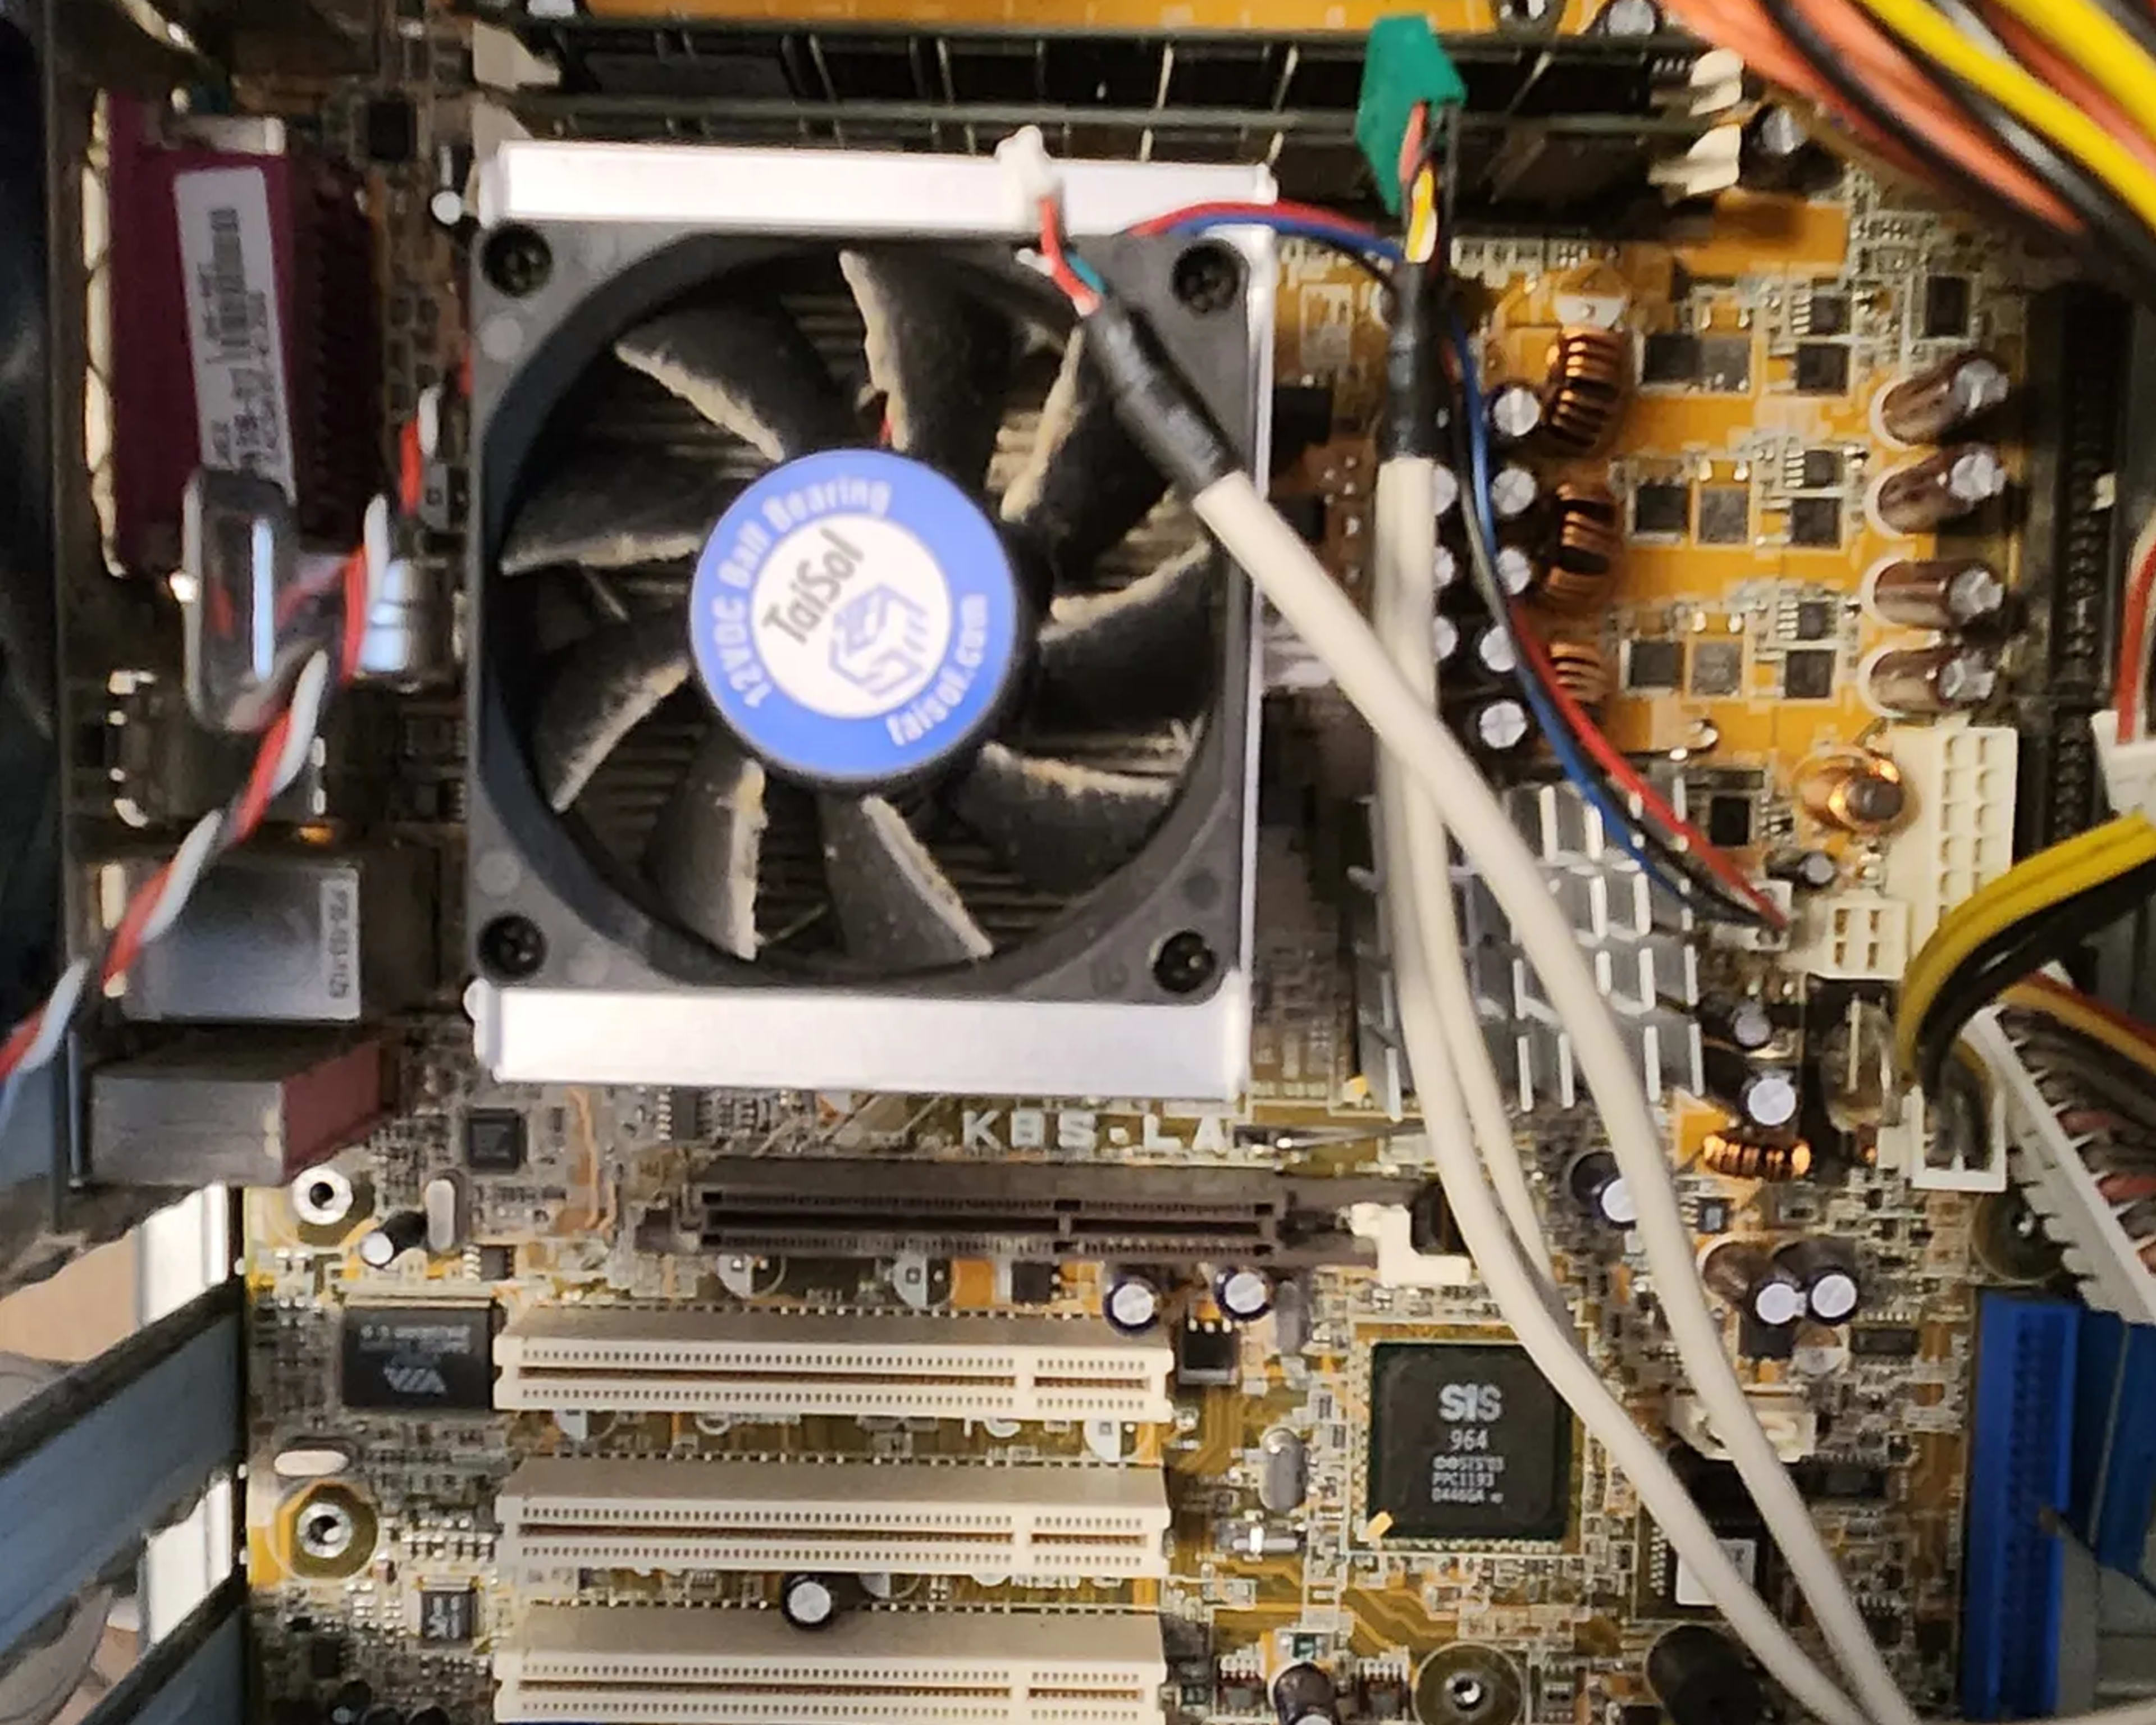 Prehistoric amd athlon 64 asus motherboard ram combo with a nvidia fx 5500 and a miscellaneous card